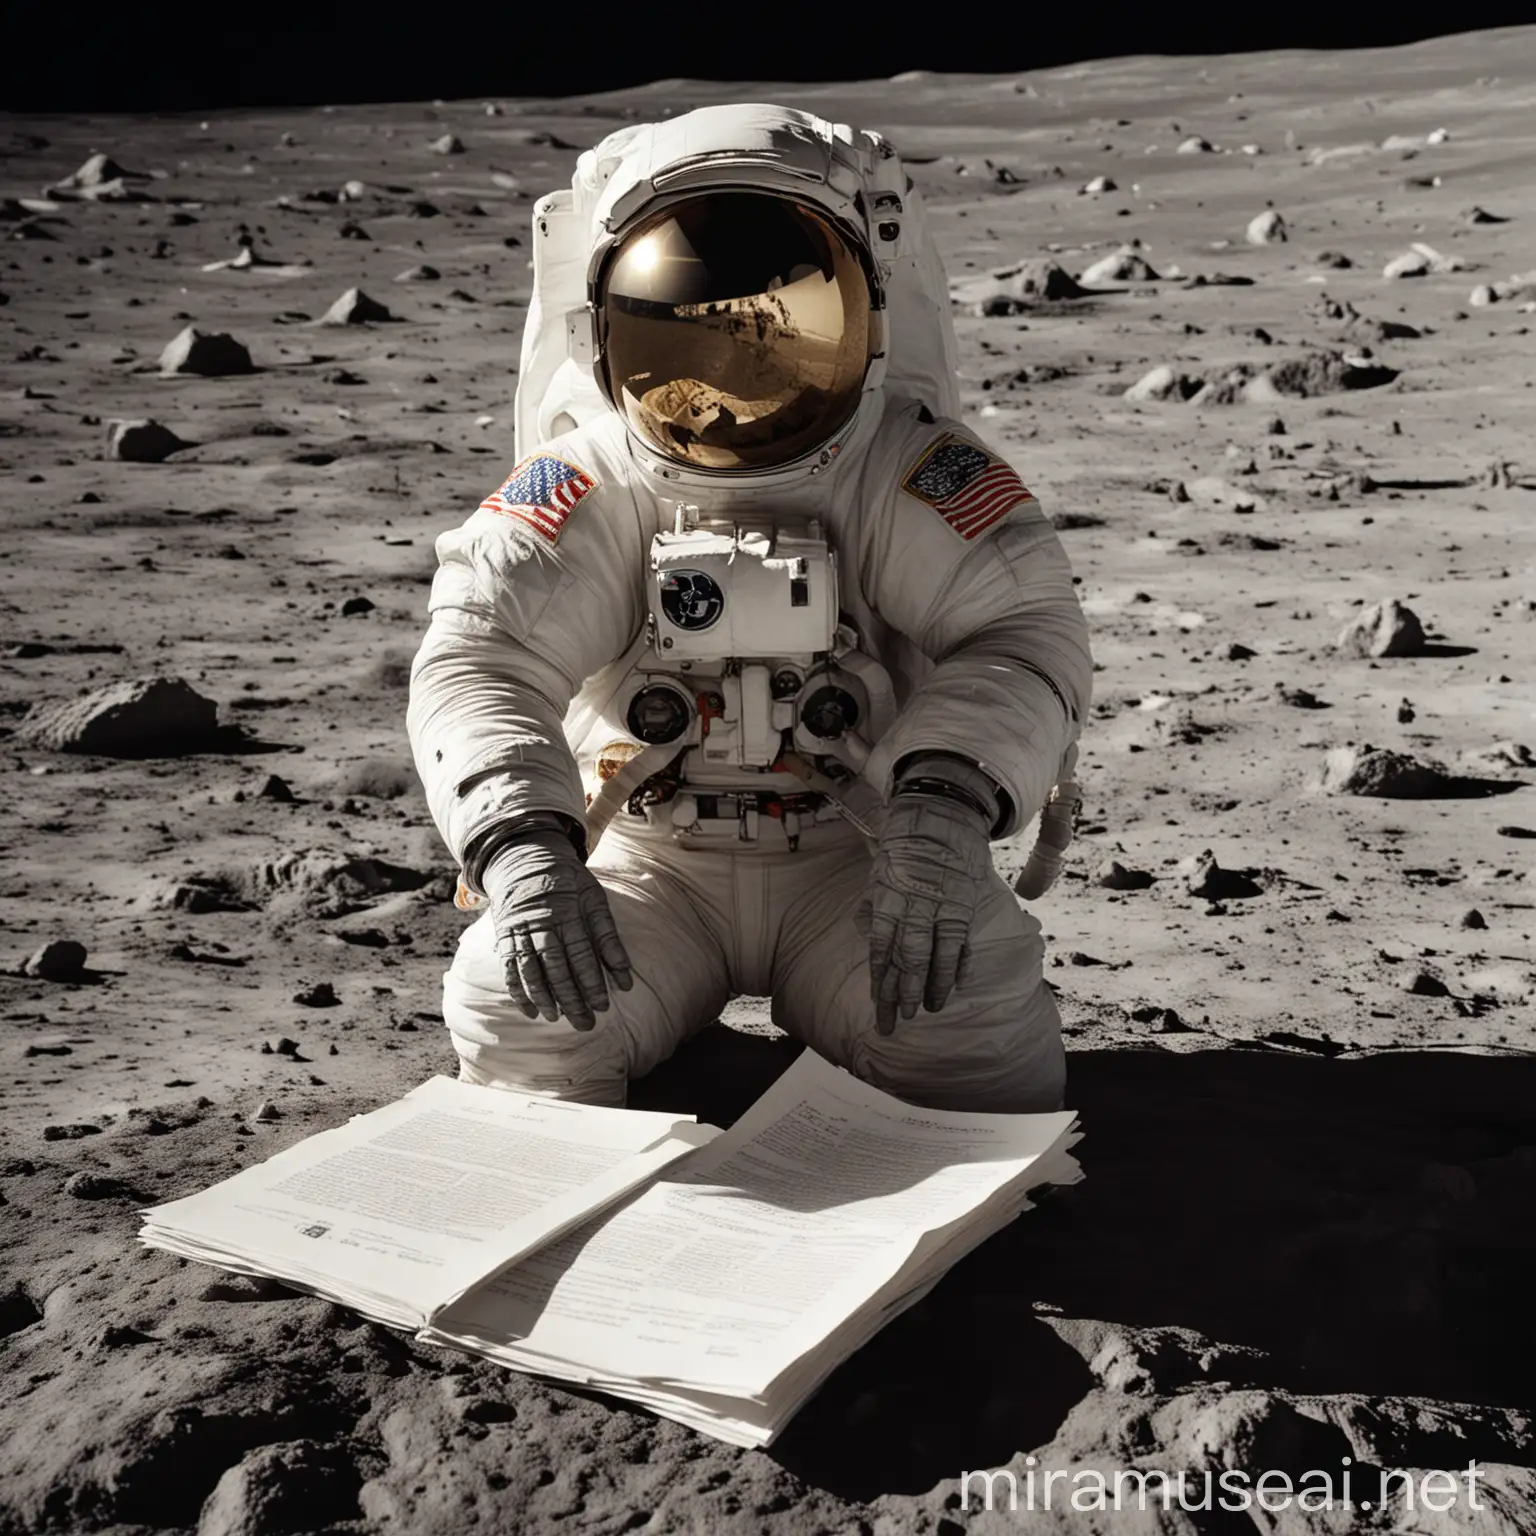 An astronaut is sitting on the moon with documents in his hands